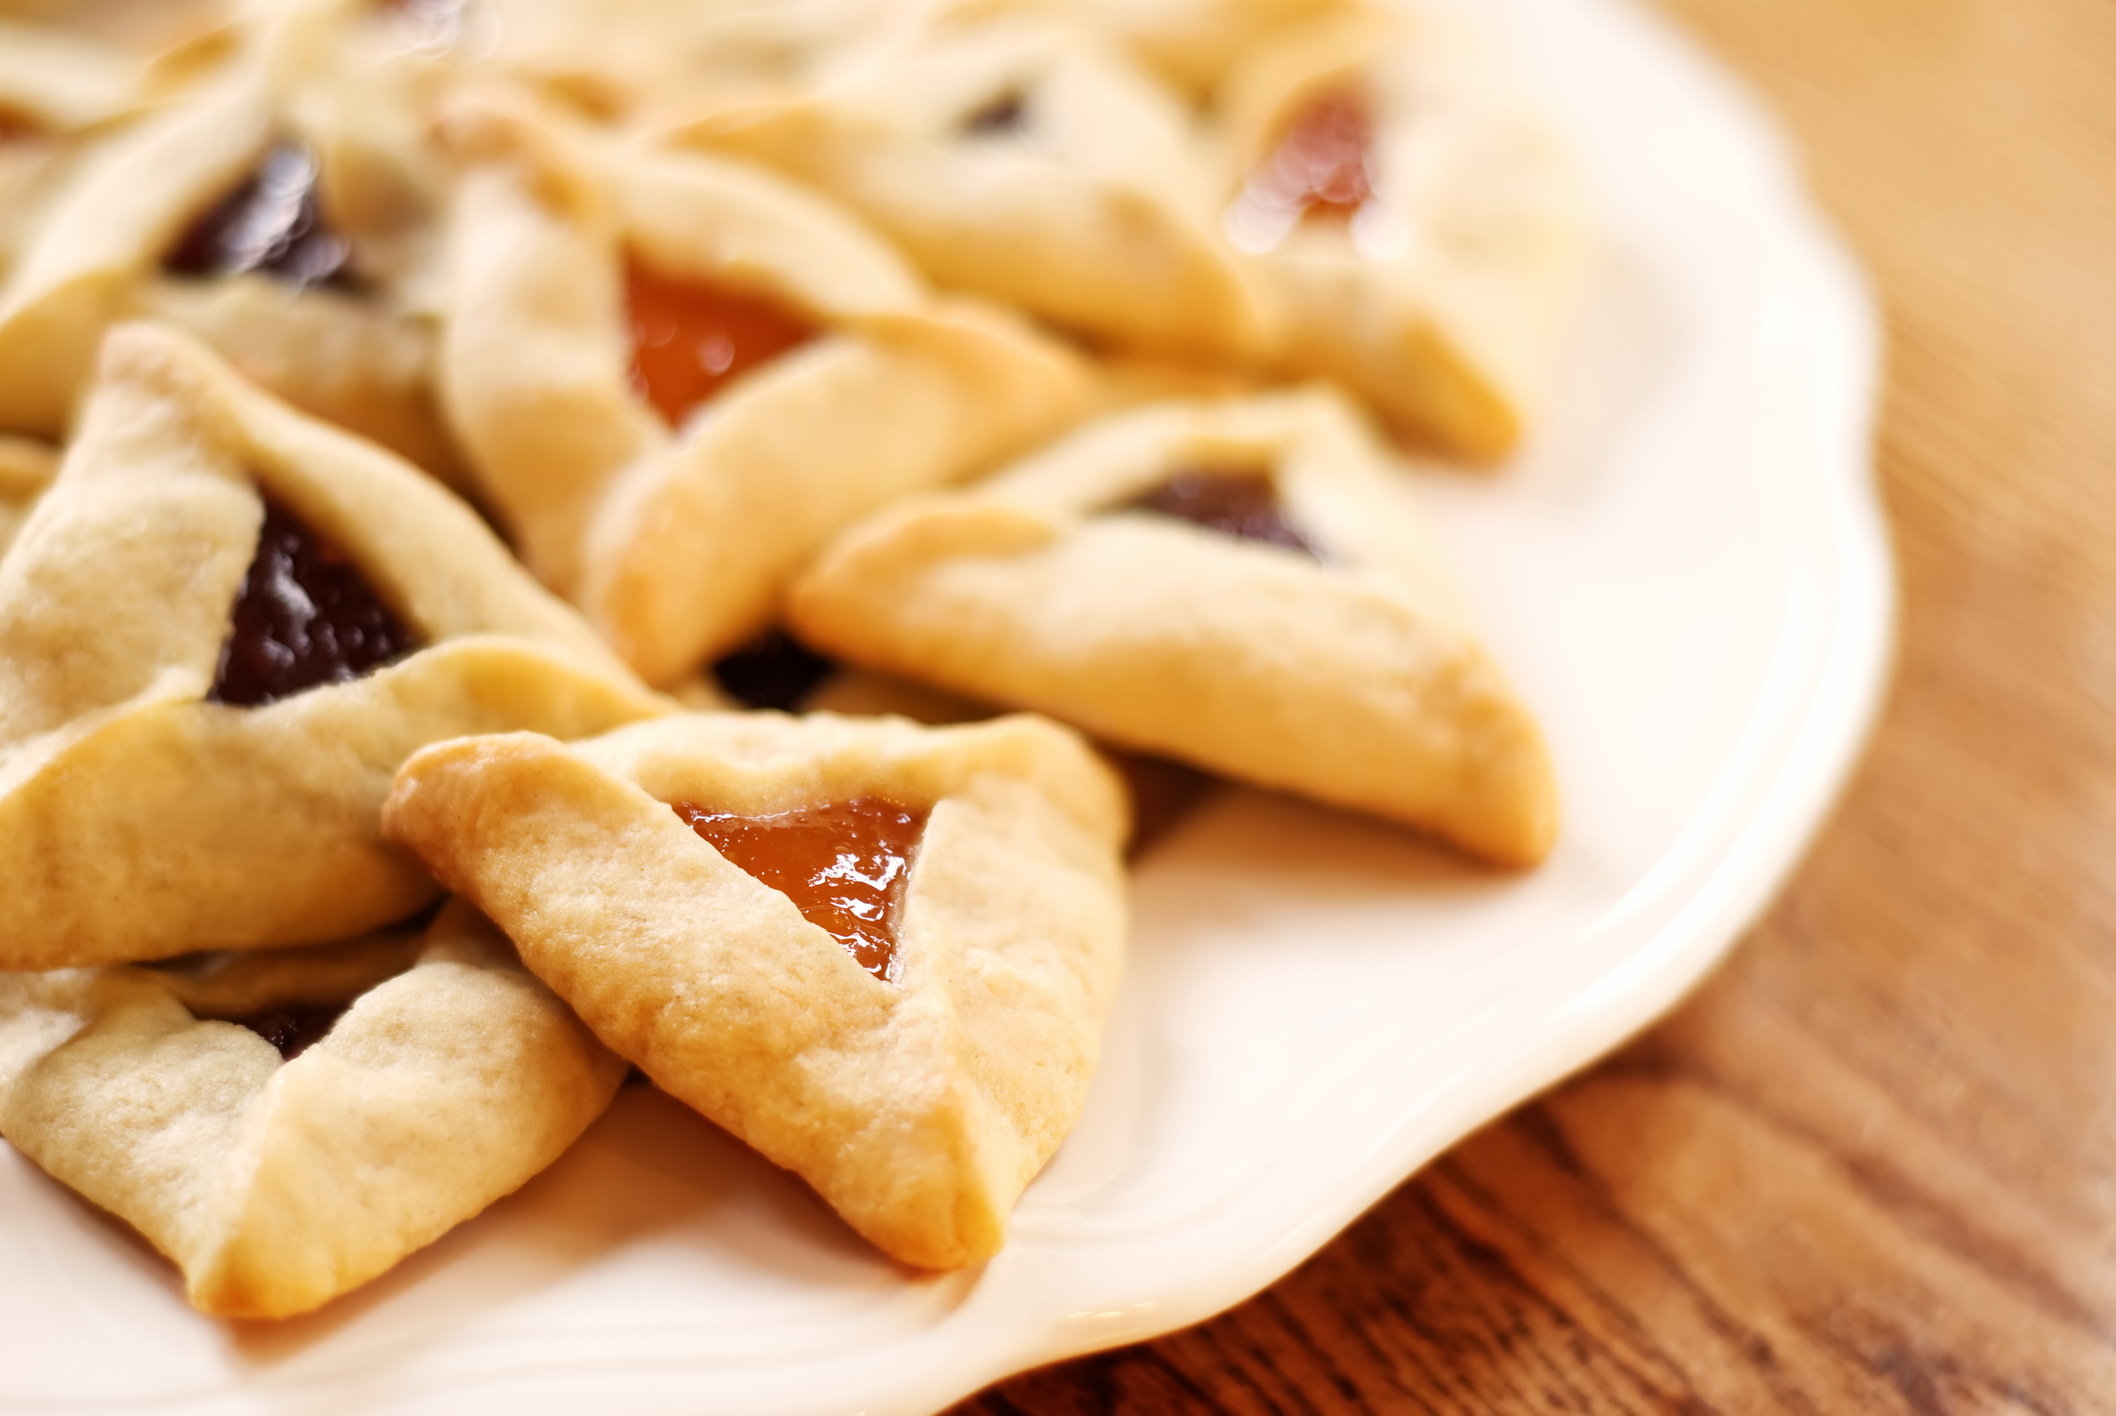 Traditional hamantaschen cookies for the Jewish festival of Purim. (Blueenayim—Getty Images/iStockphoto)